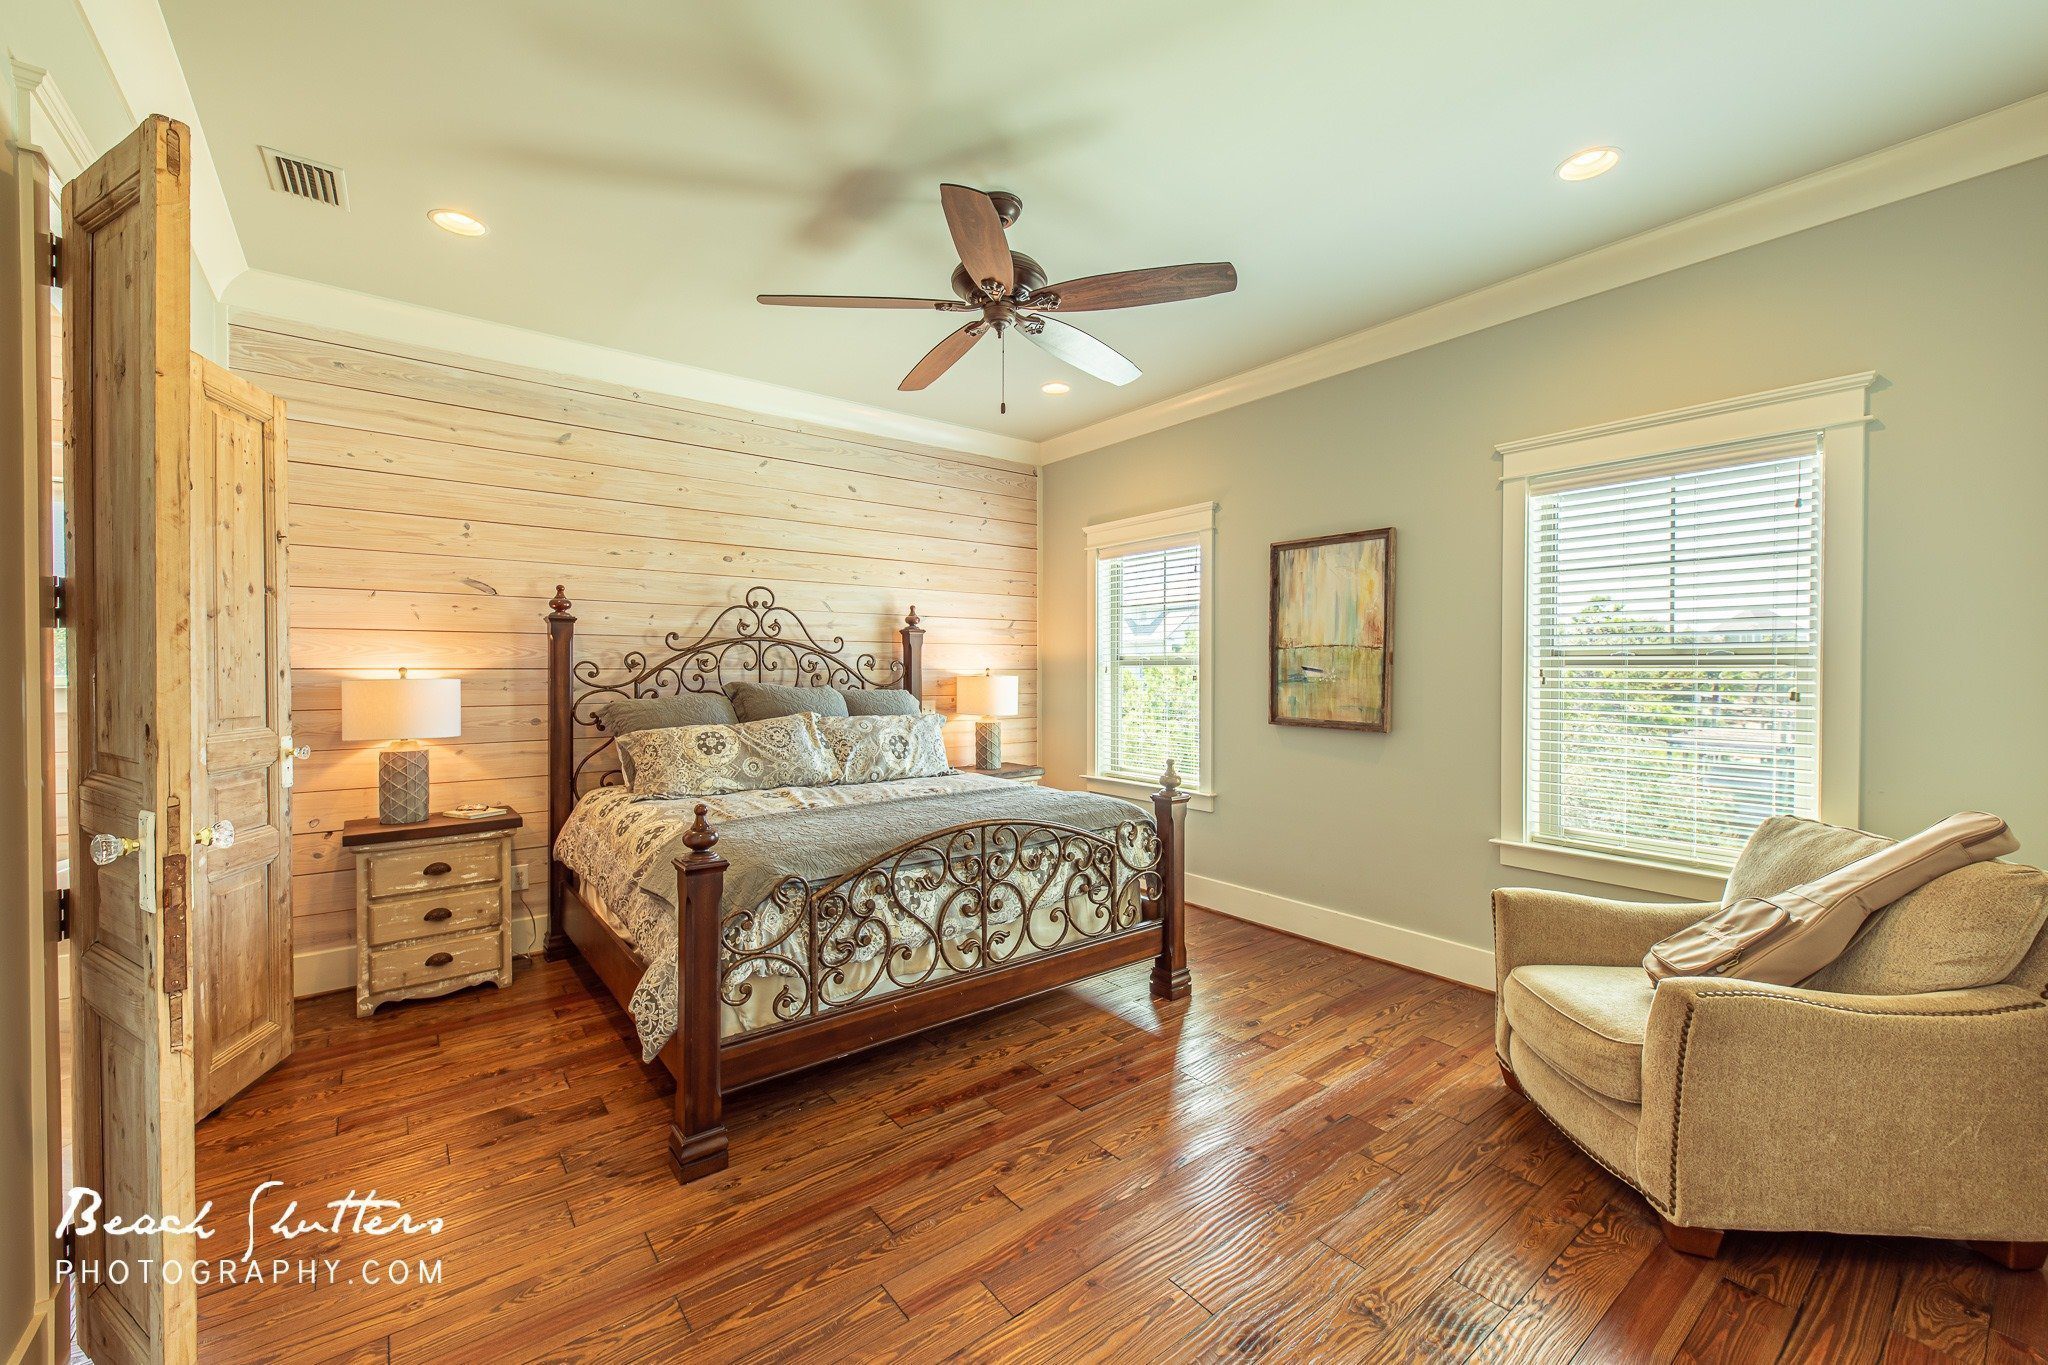 HDR real estate photography